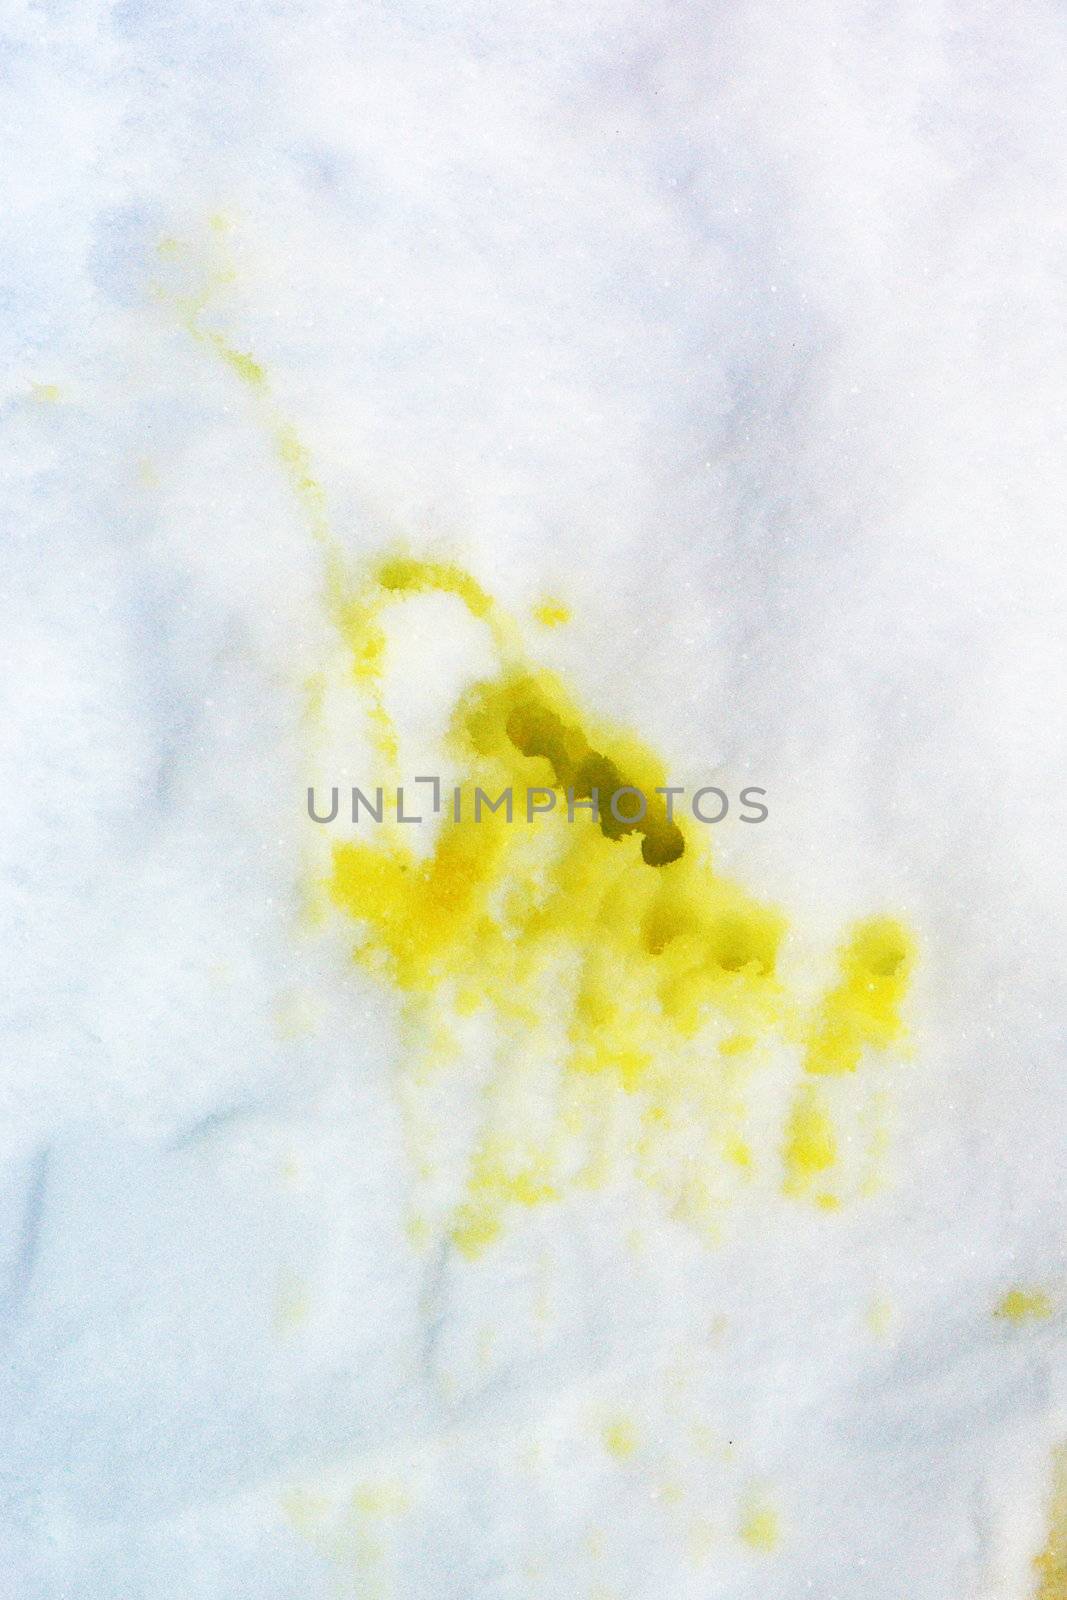 Traces of dog urine in the snow